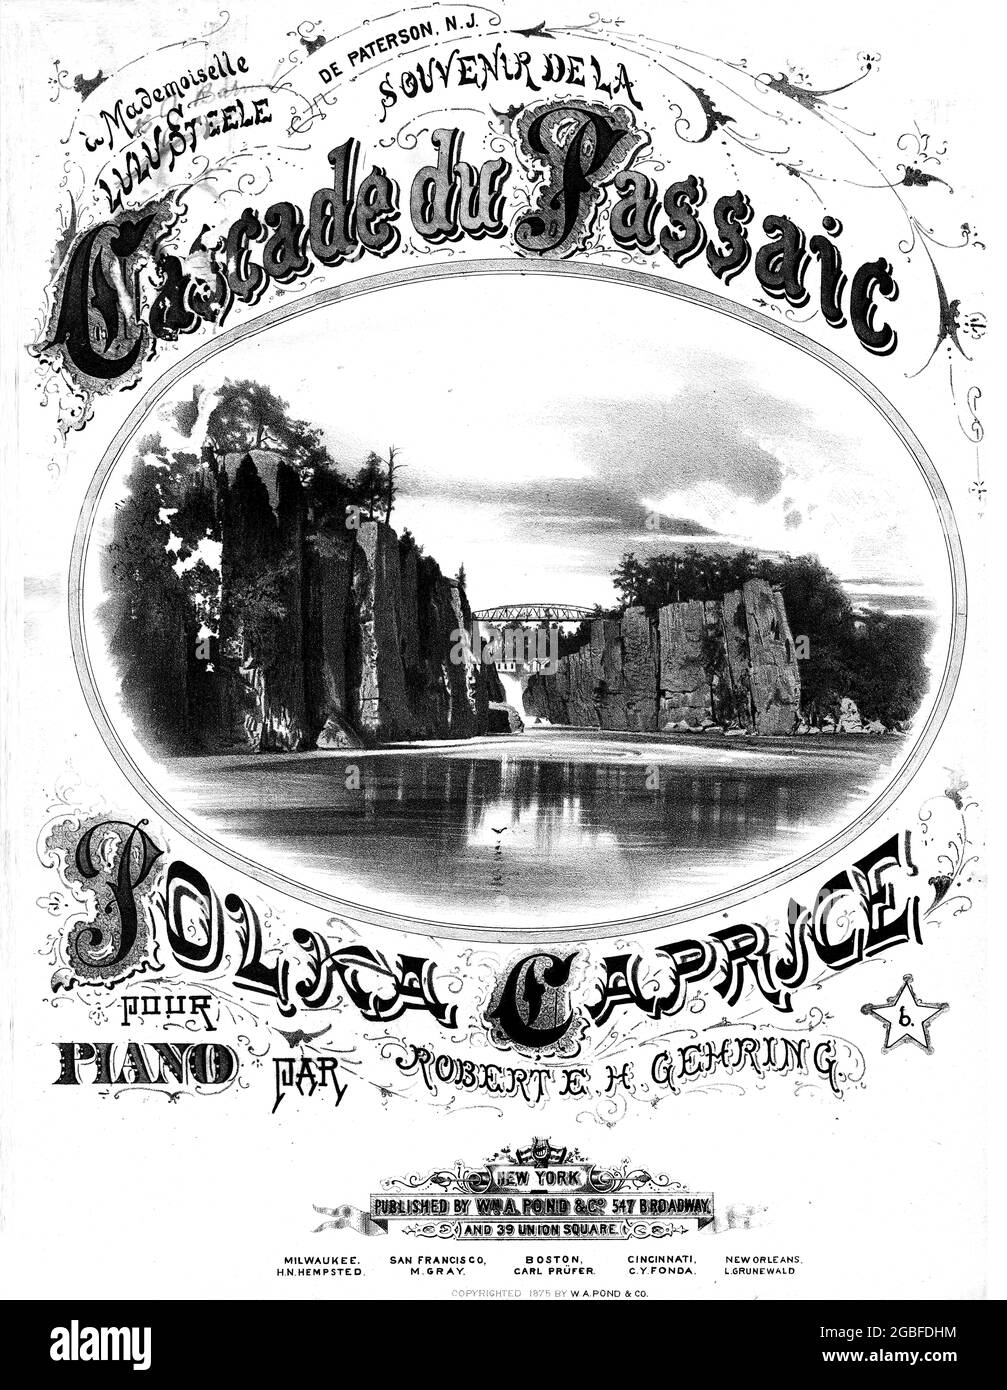 Cascade du Passaic, 1875 sheet music of the Passaic Fall or Paterson Great Falls in Patterson, New Jersey. Nice b/w lithograph of the falls. Stock Photo